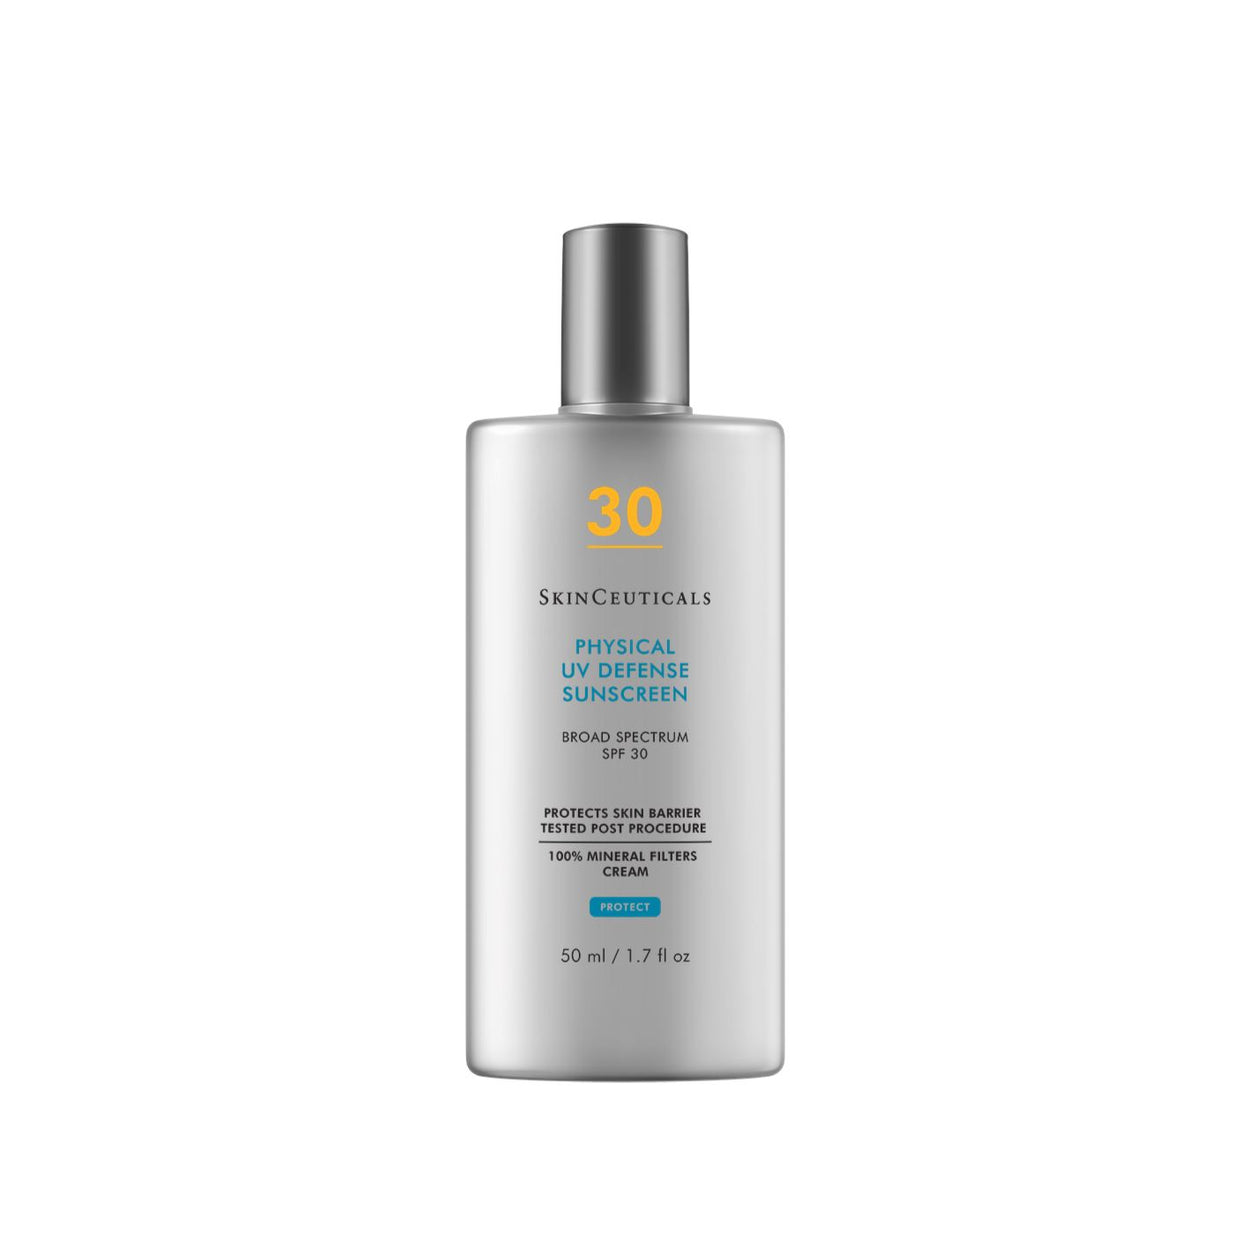 SkinCeuticals Physical UV Defense SPF 30 Mineral Sunscreen SkinCeuticals 1.7 fl. oz. Shop at Exclusive Beauty Club